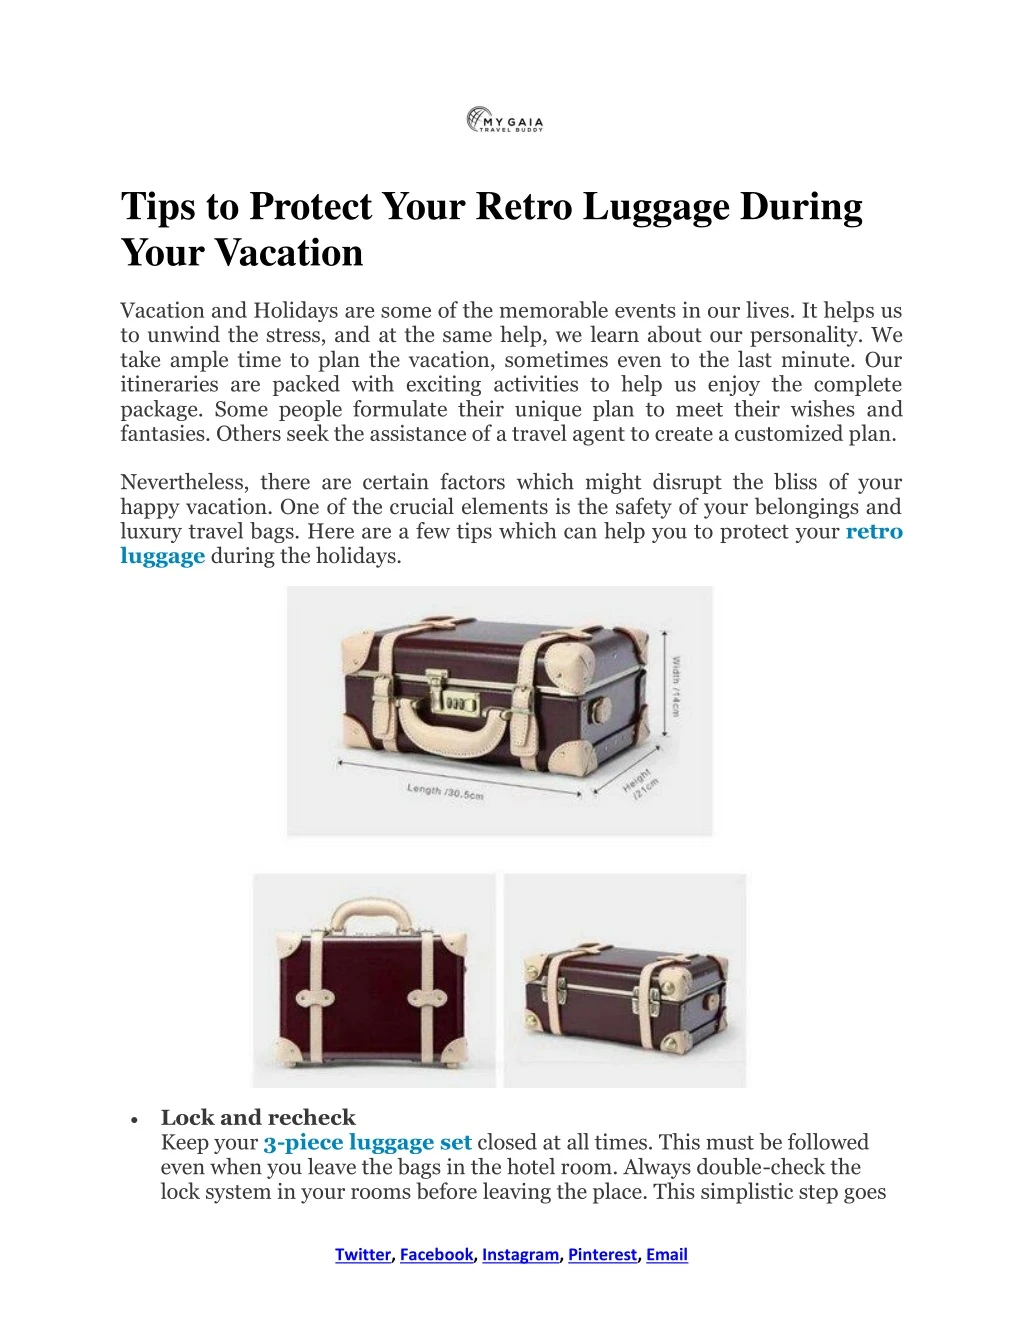 tips to protect your retro luggage during your